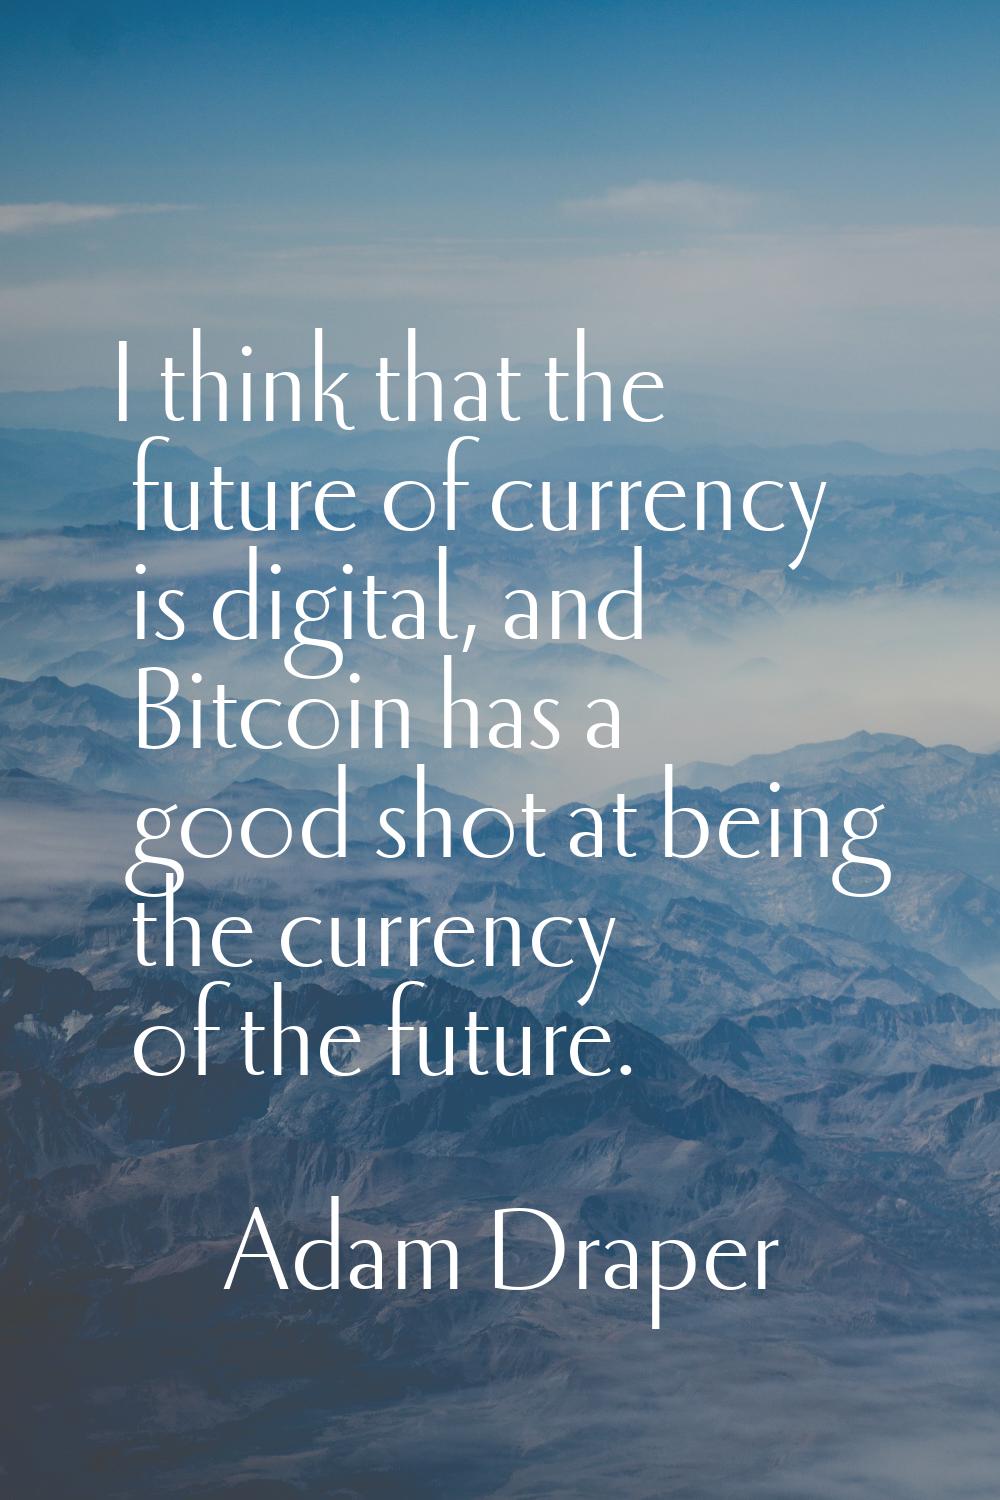 I think that the future of currency is digital, and Bitcoin has a good shot at being the currency o